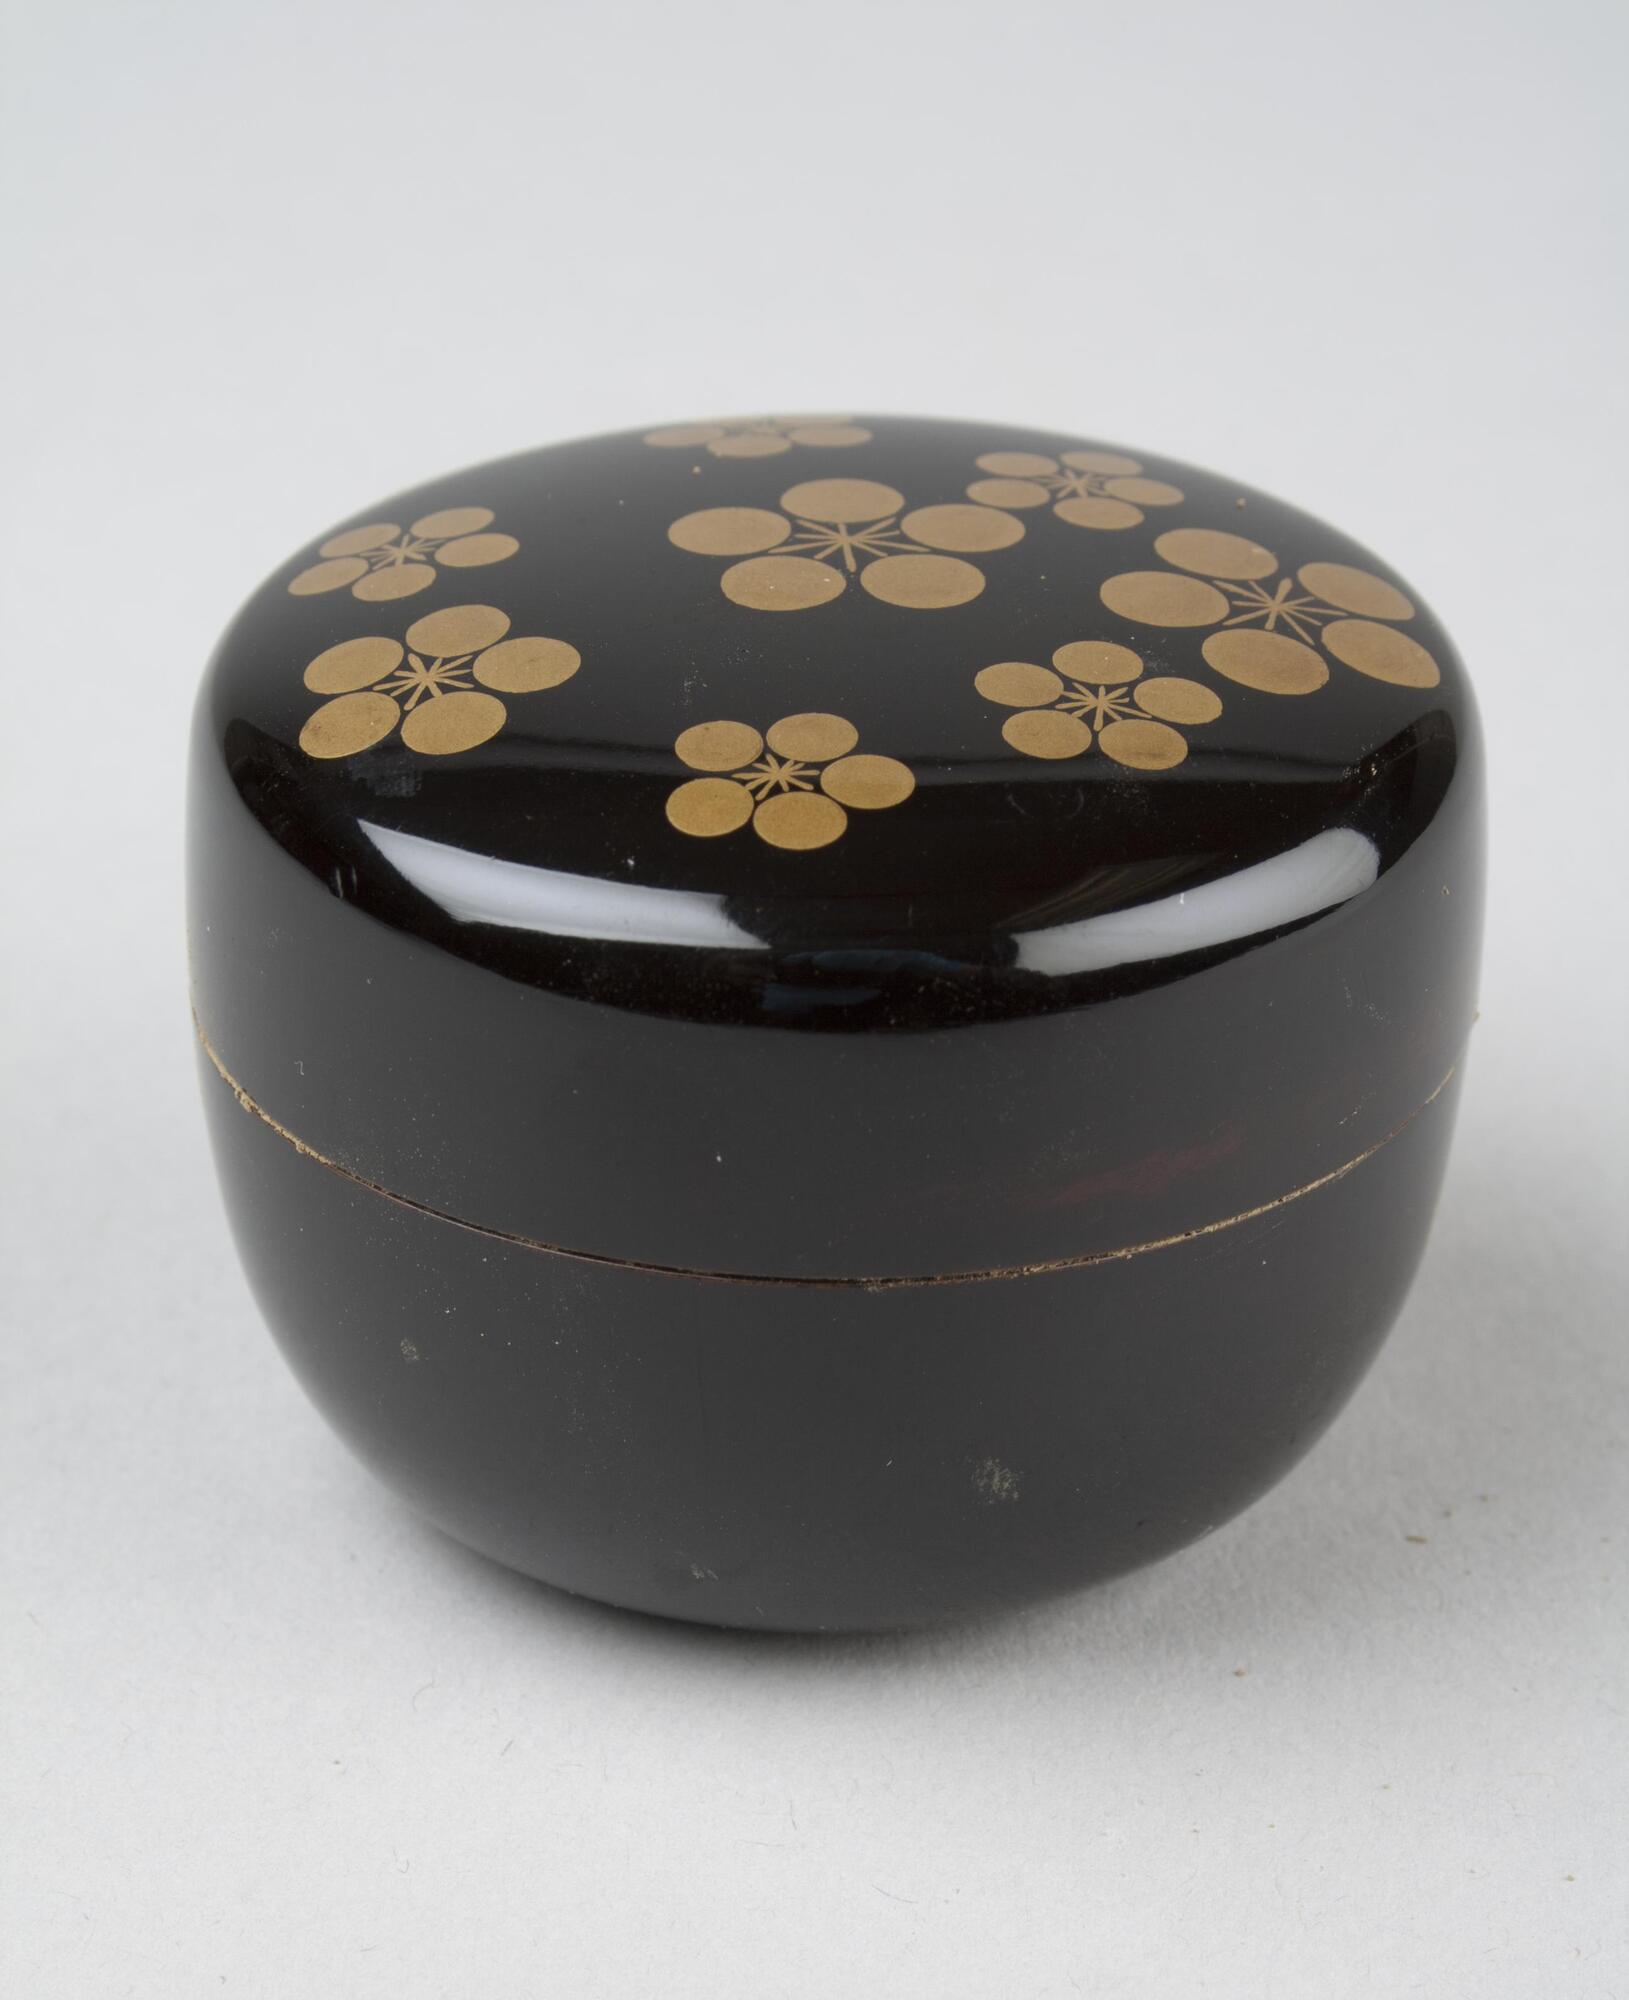 Black square box with gold flowers on the top.